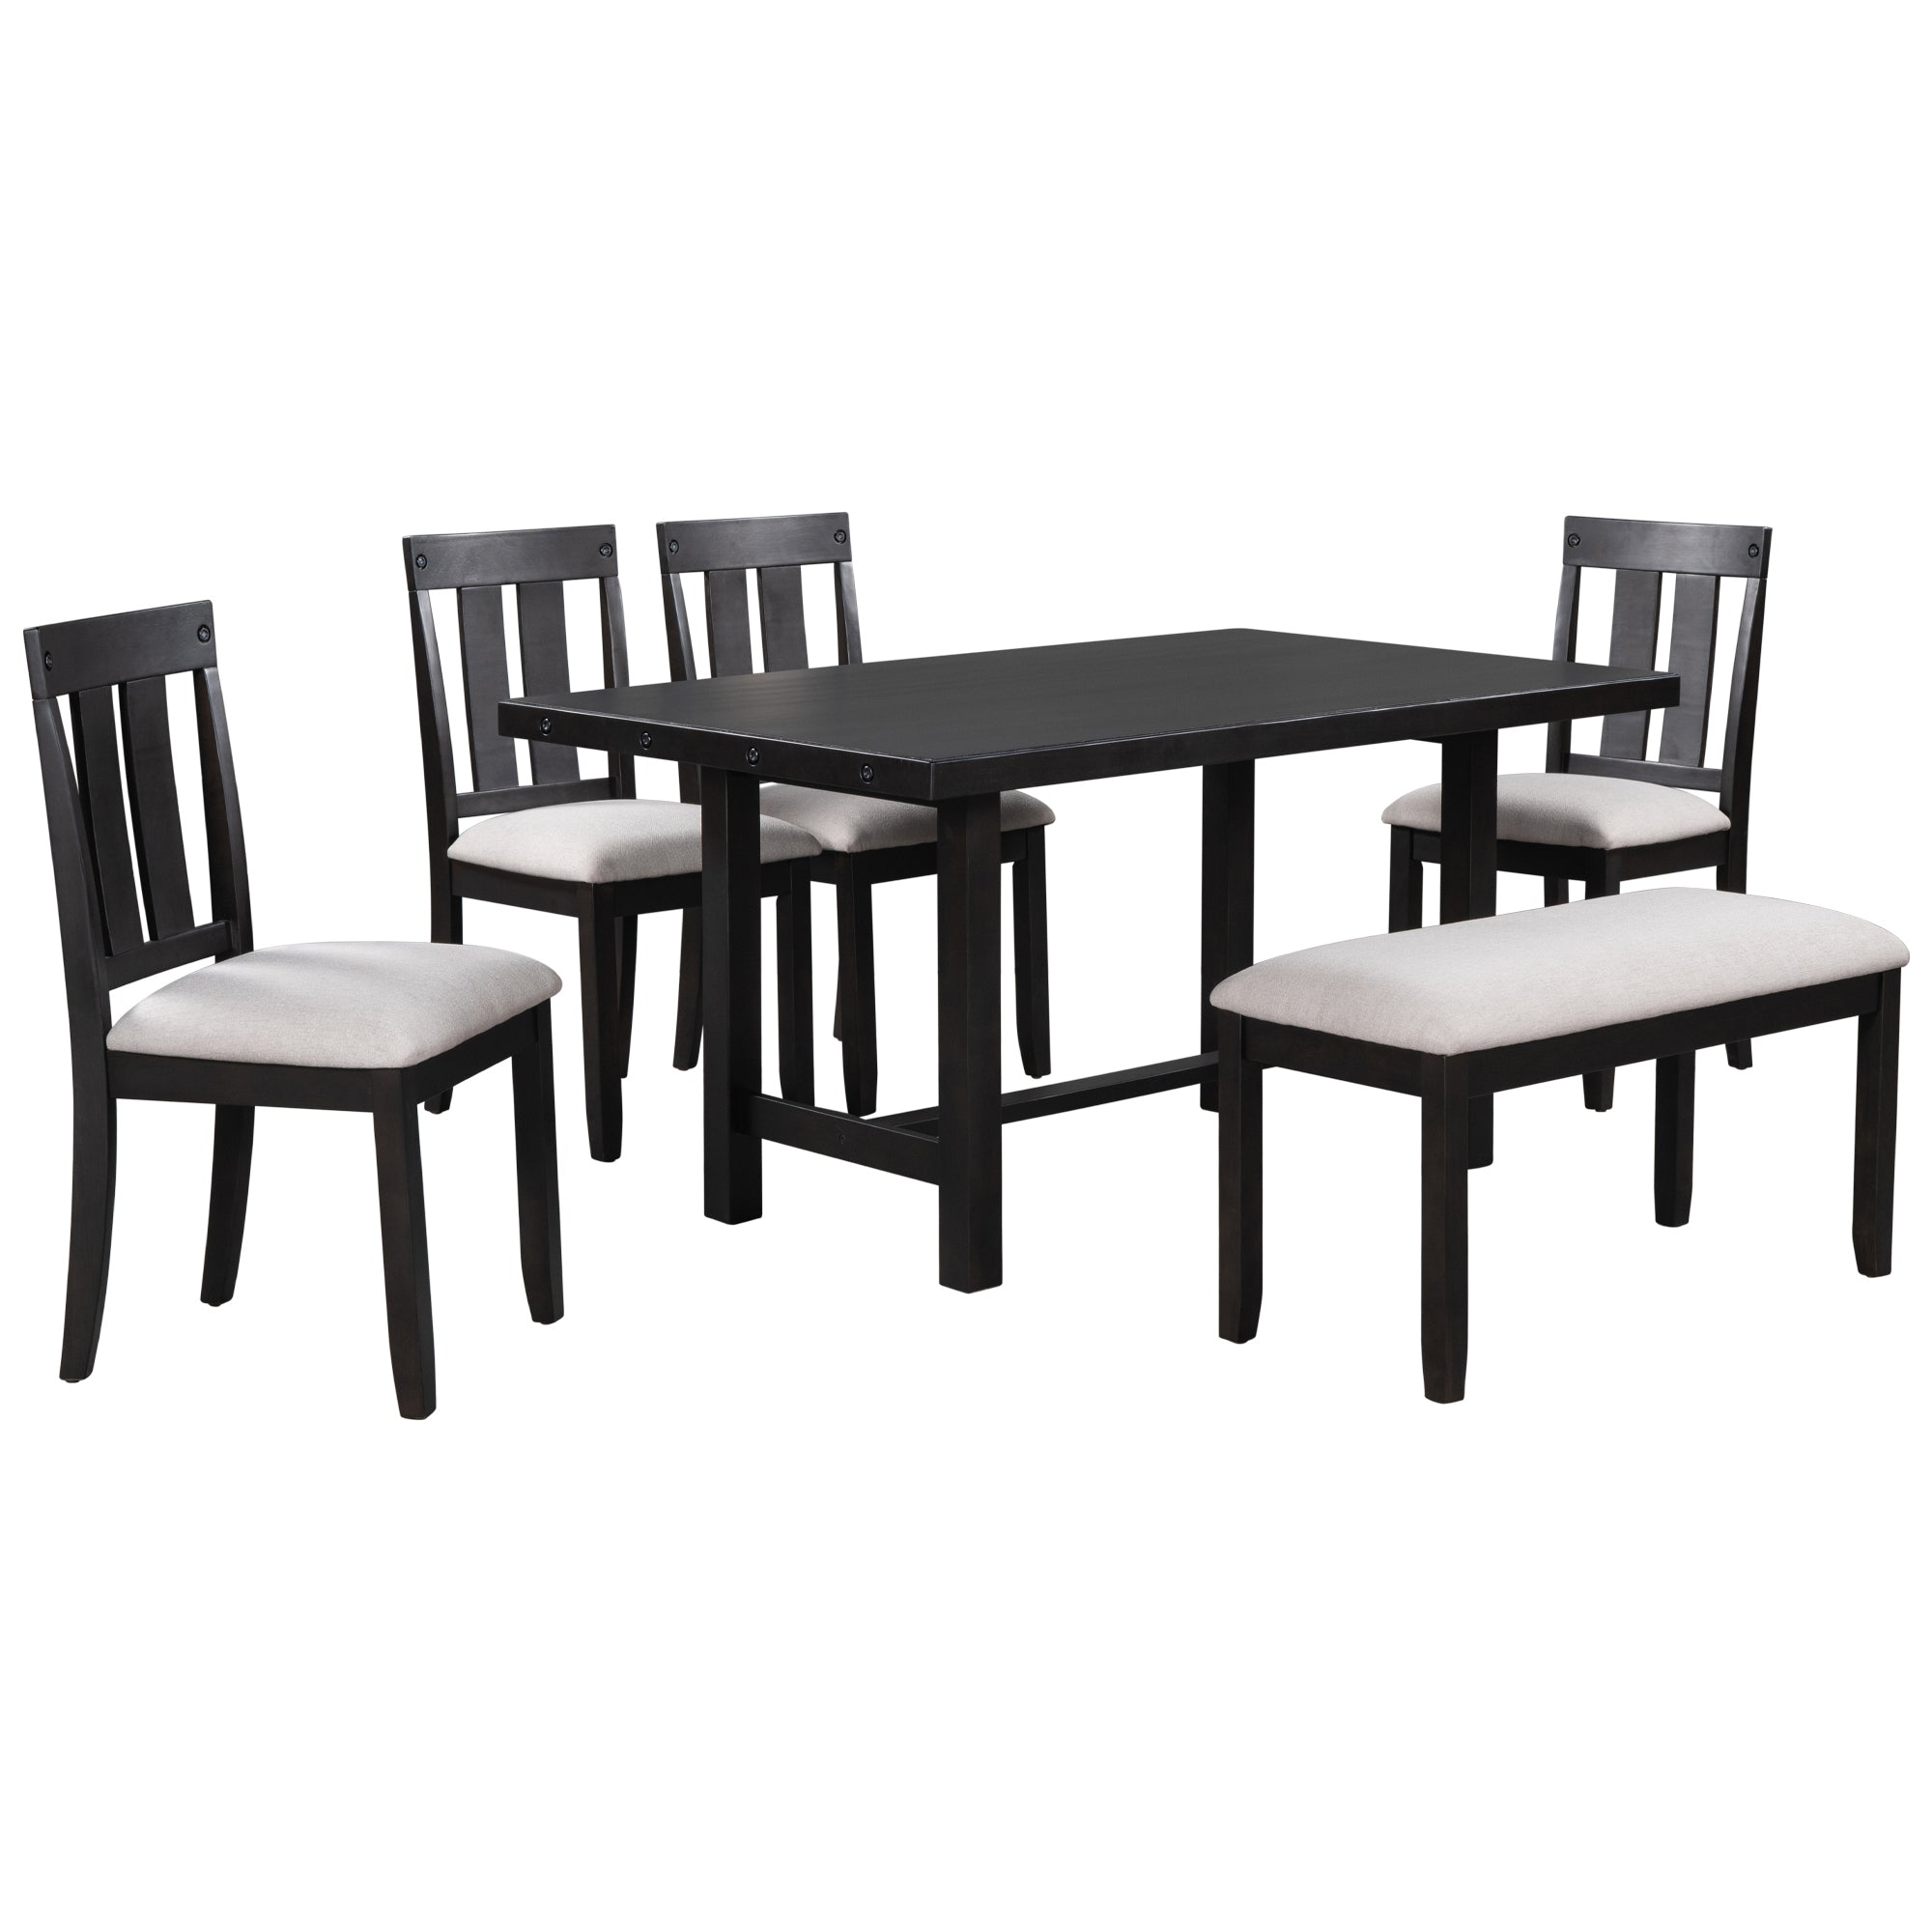 6-Piece Wooden Rustic Style Dining Set with Table, 4 Chairs & Bench (Espresso)